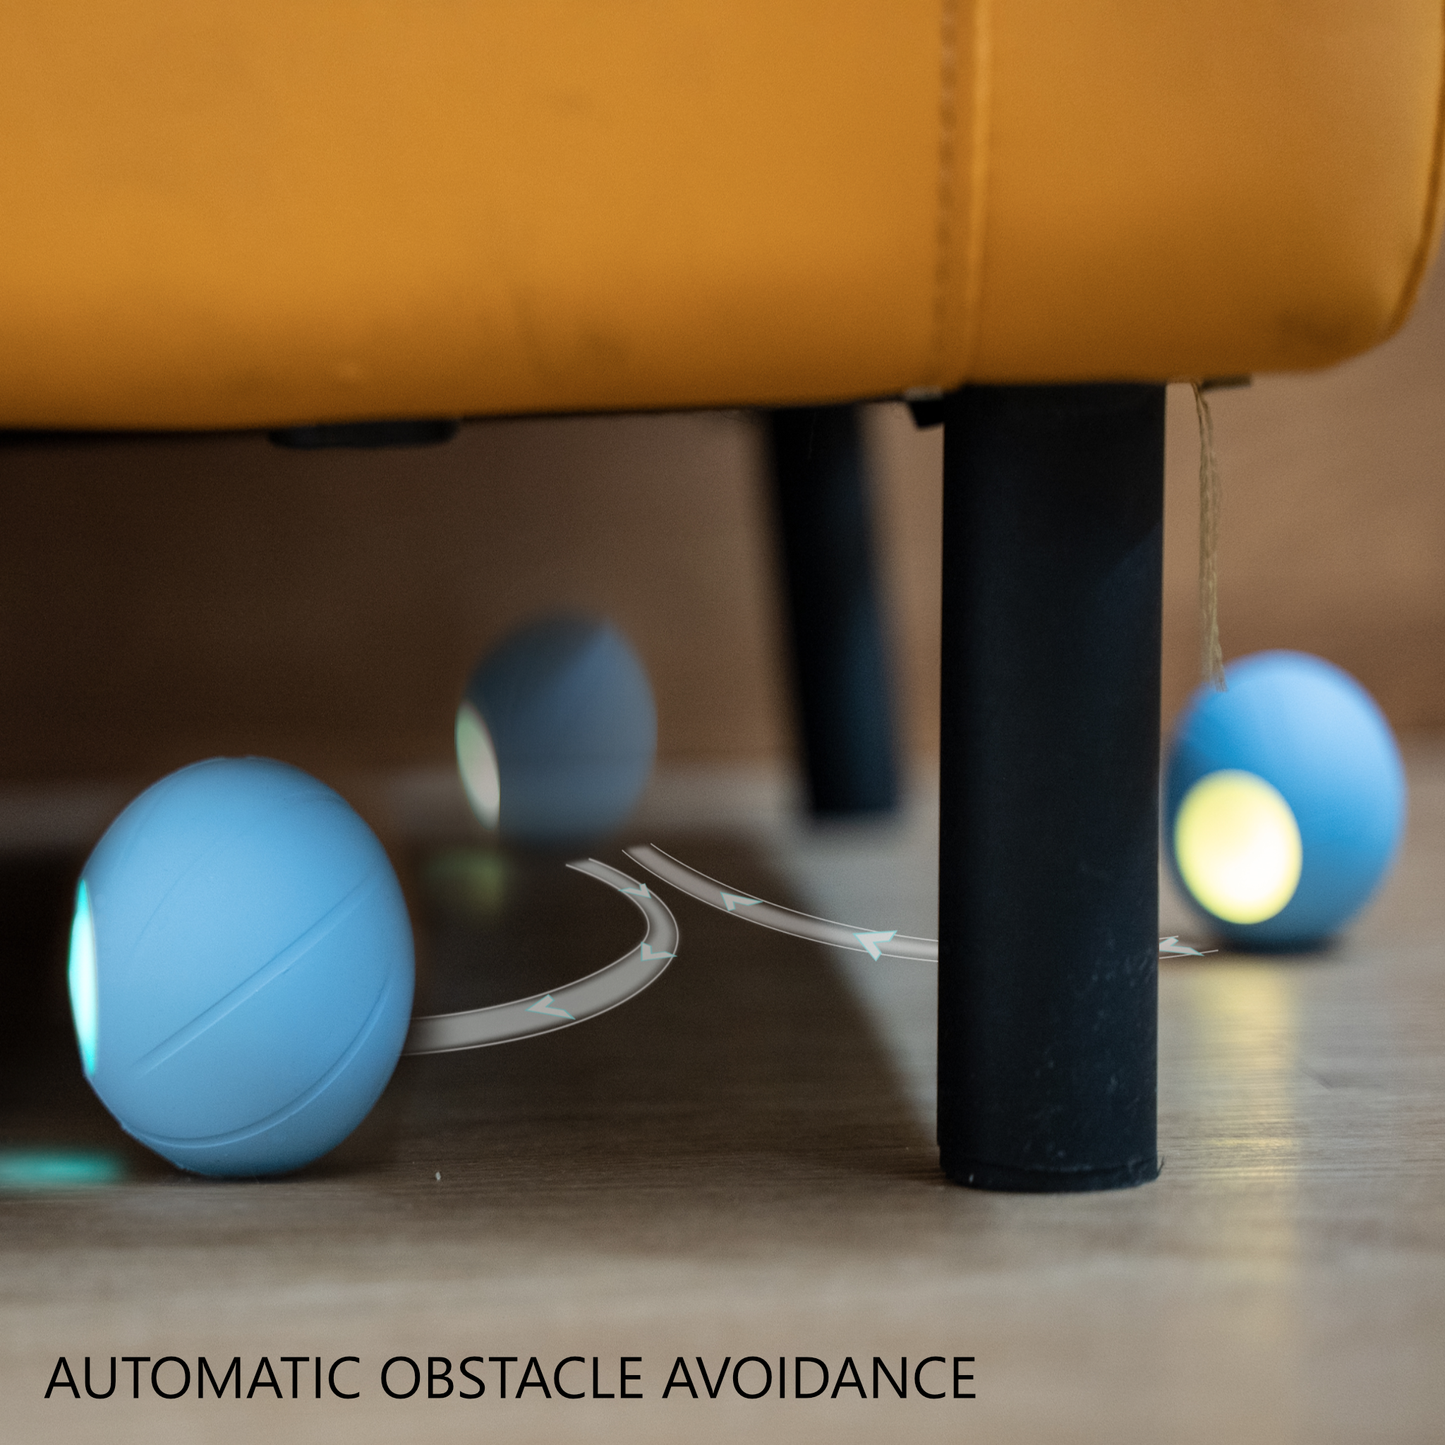 Cheerble's Wicked Ball is a smart toy that likes to play games